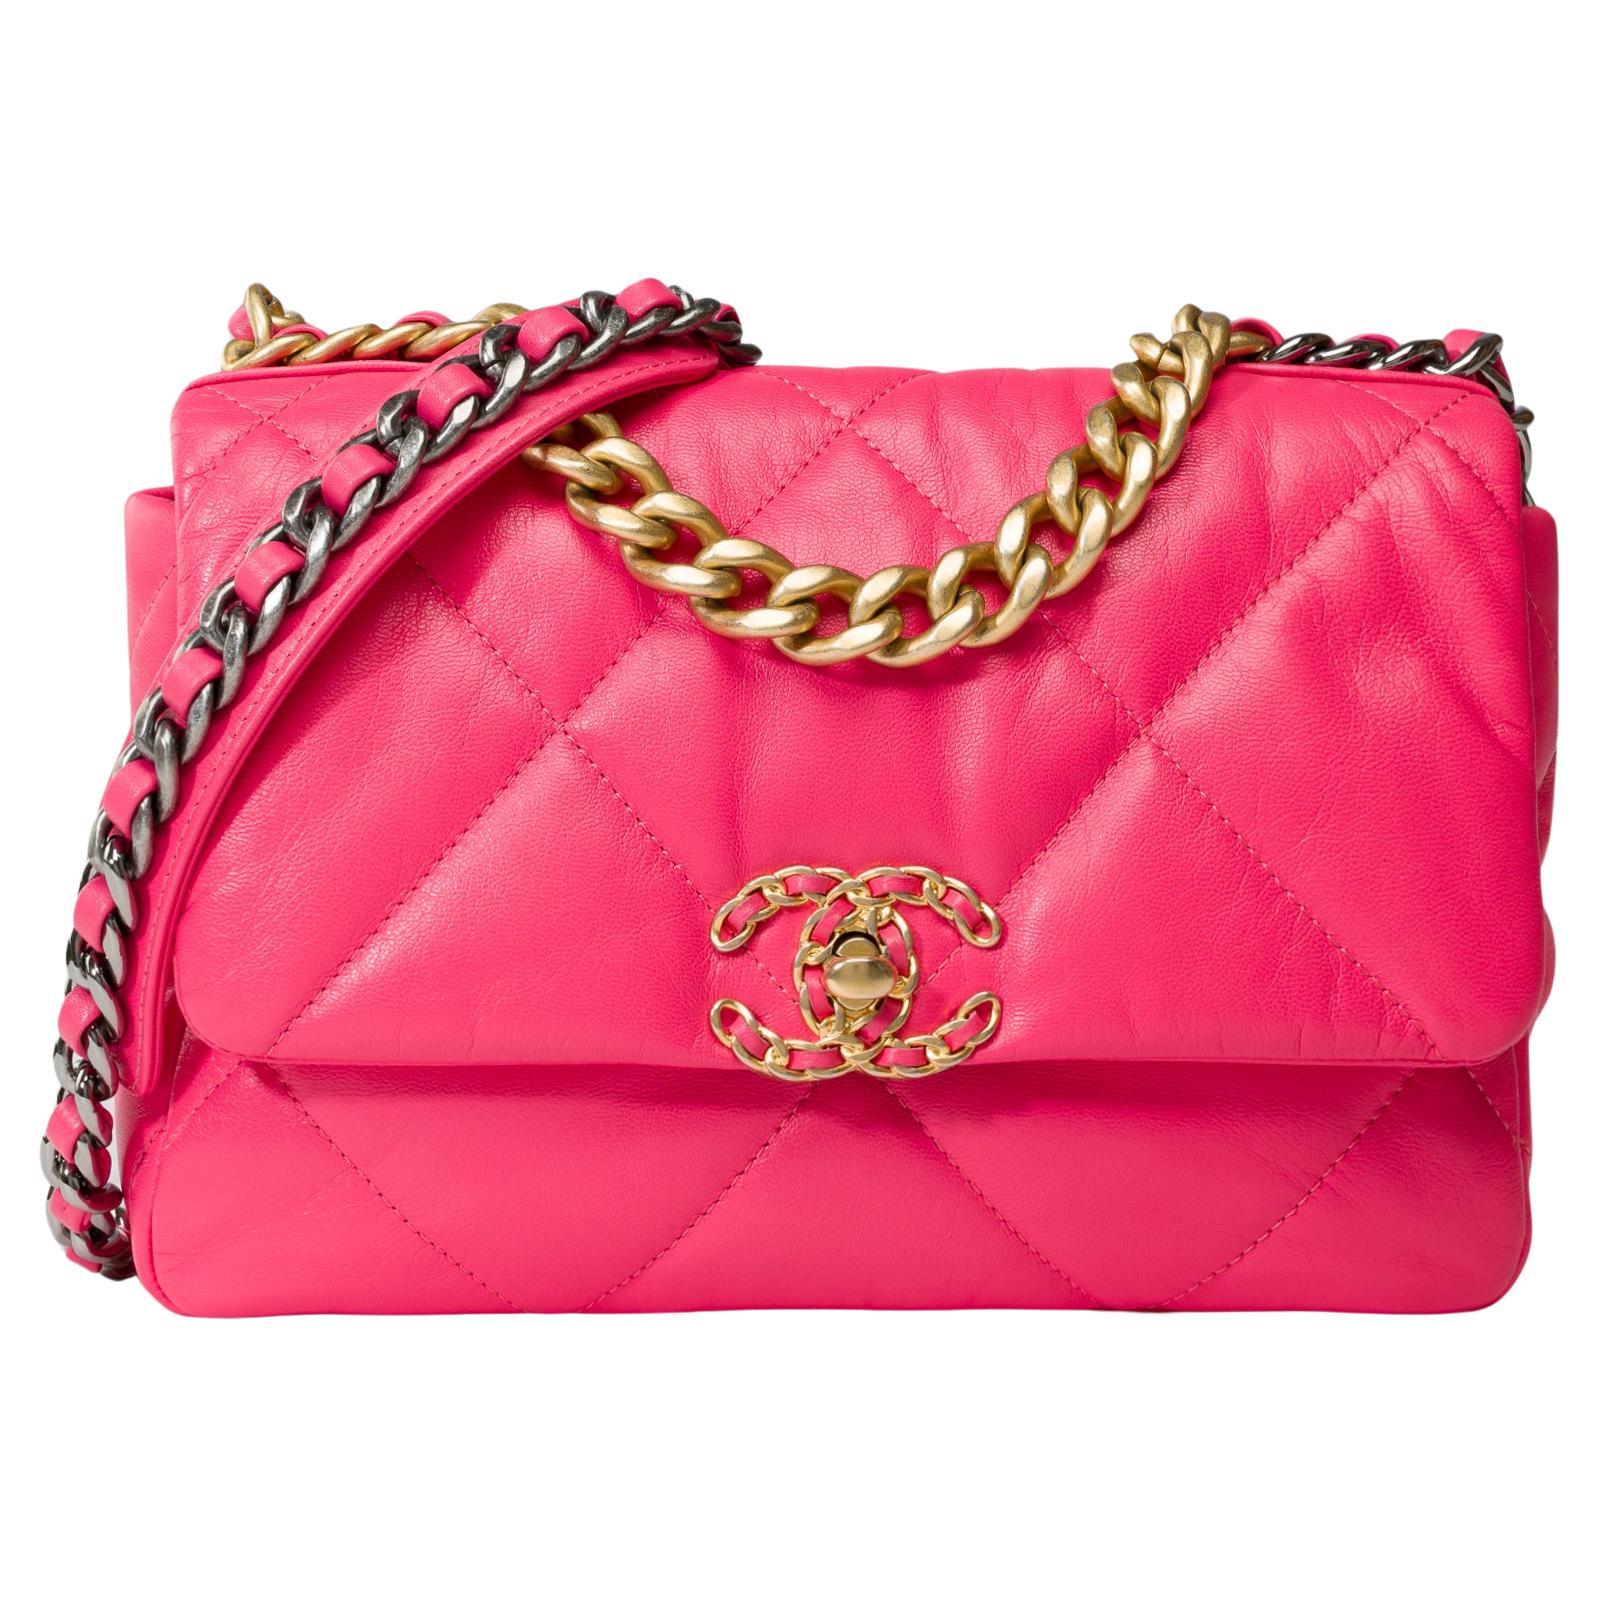 Stunning Chanel 19 shoulder bag in Pink quilted leather , Matt gold and SHW For Sale